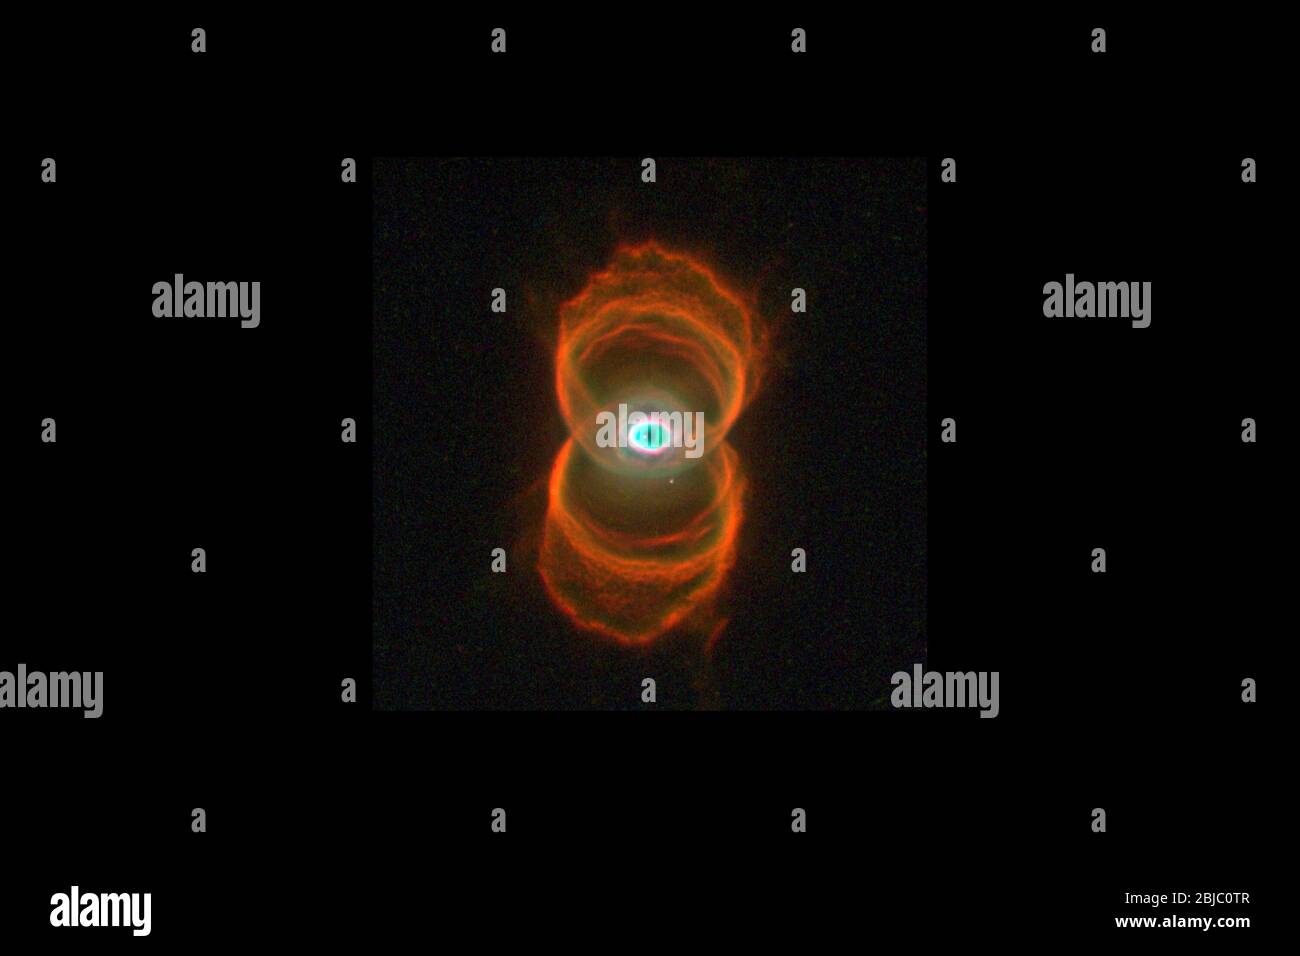 OUTER SPACE - 1996 - This Hubble telescope snapshot of MyCn18, a young planetary nebula, reveals that the object has an hourglass shape with an intric Stock Photo